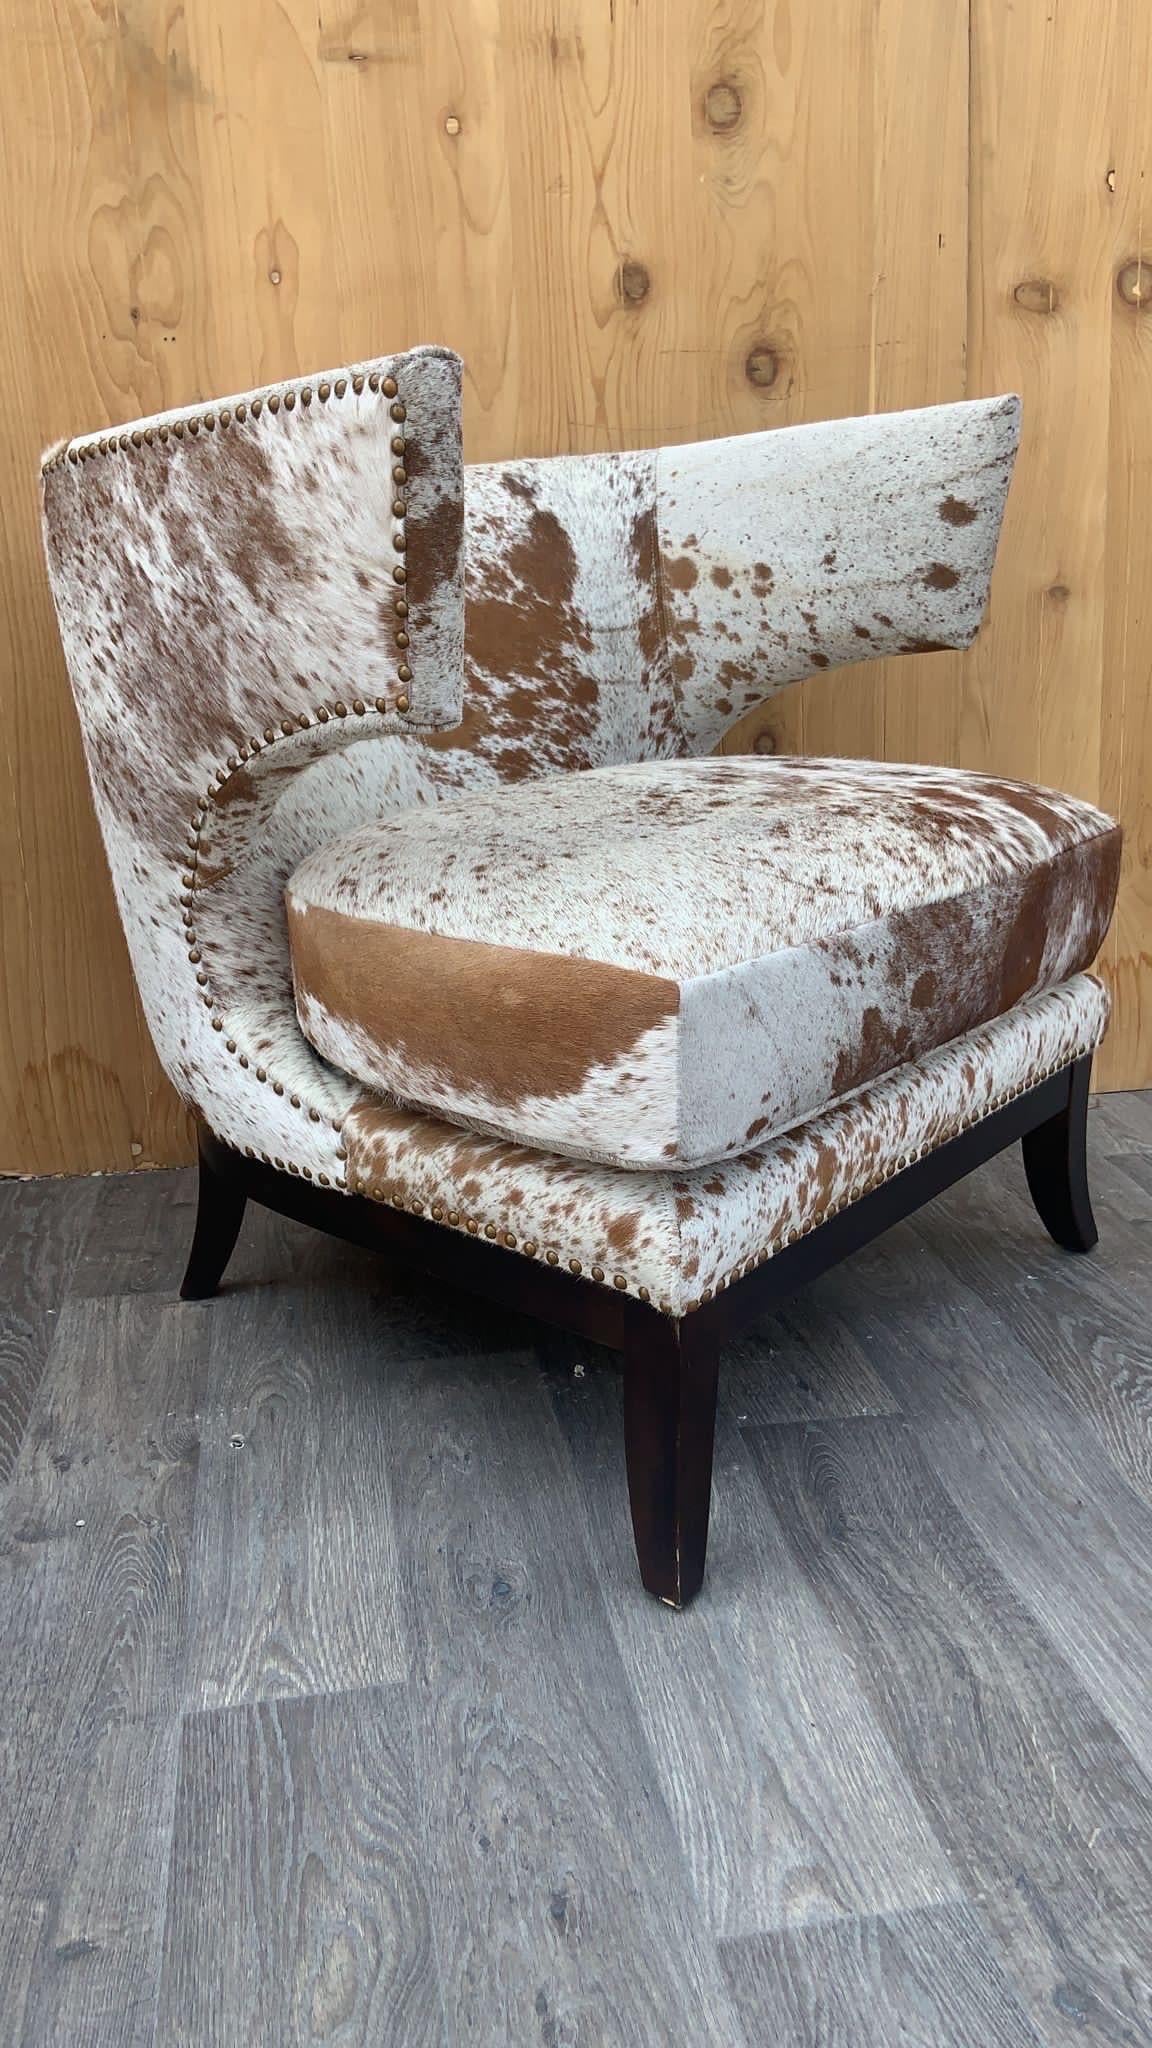 English Horseshoe Savoy Chairs Newly Upholstered in Brazilian Cowhide - Set of 2 10